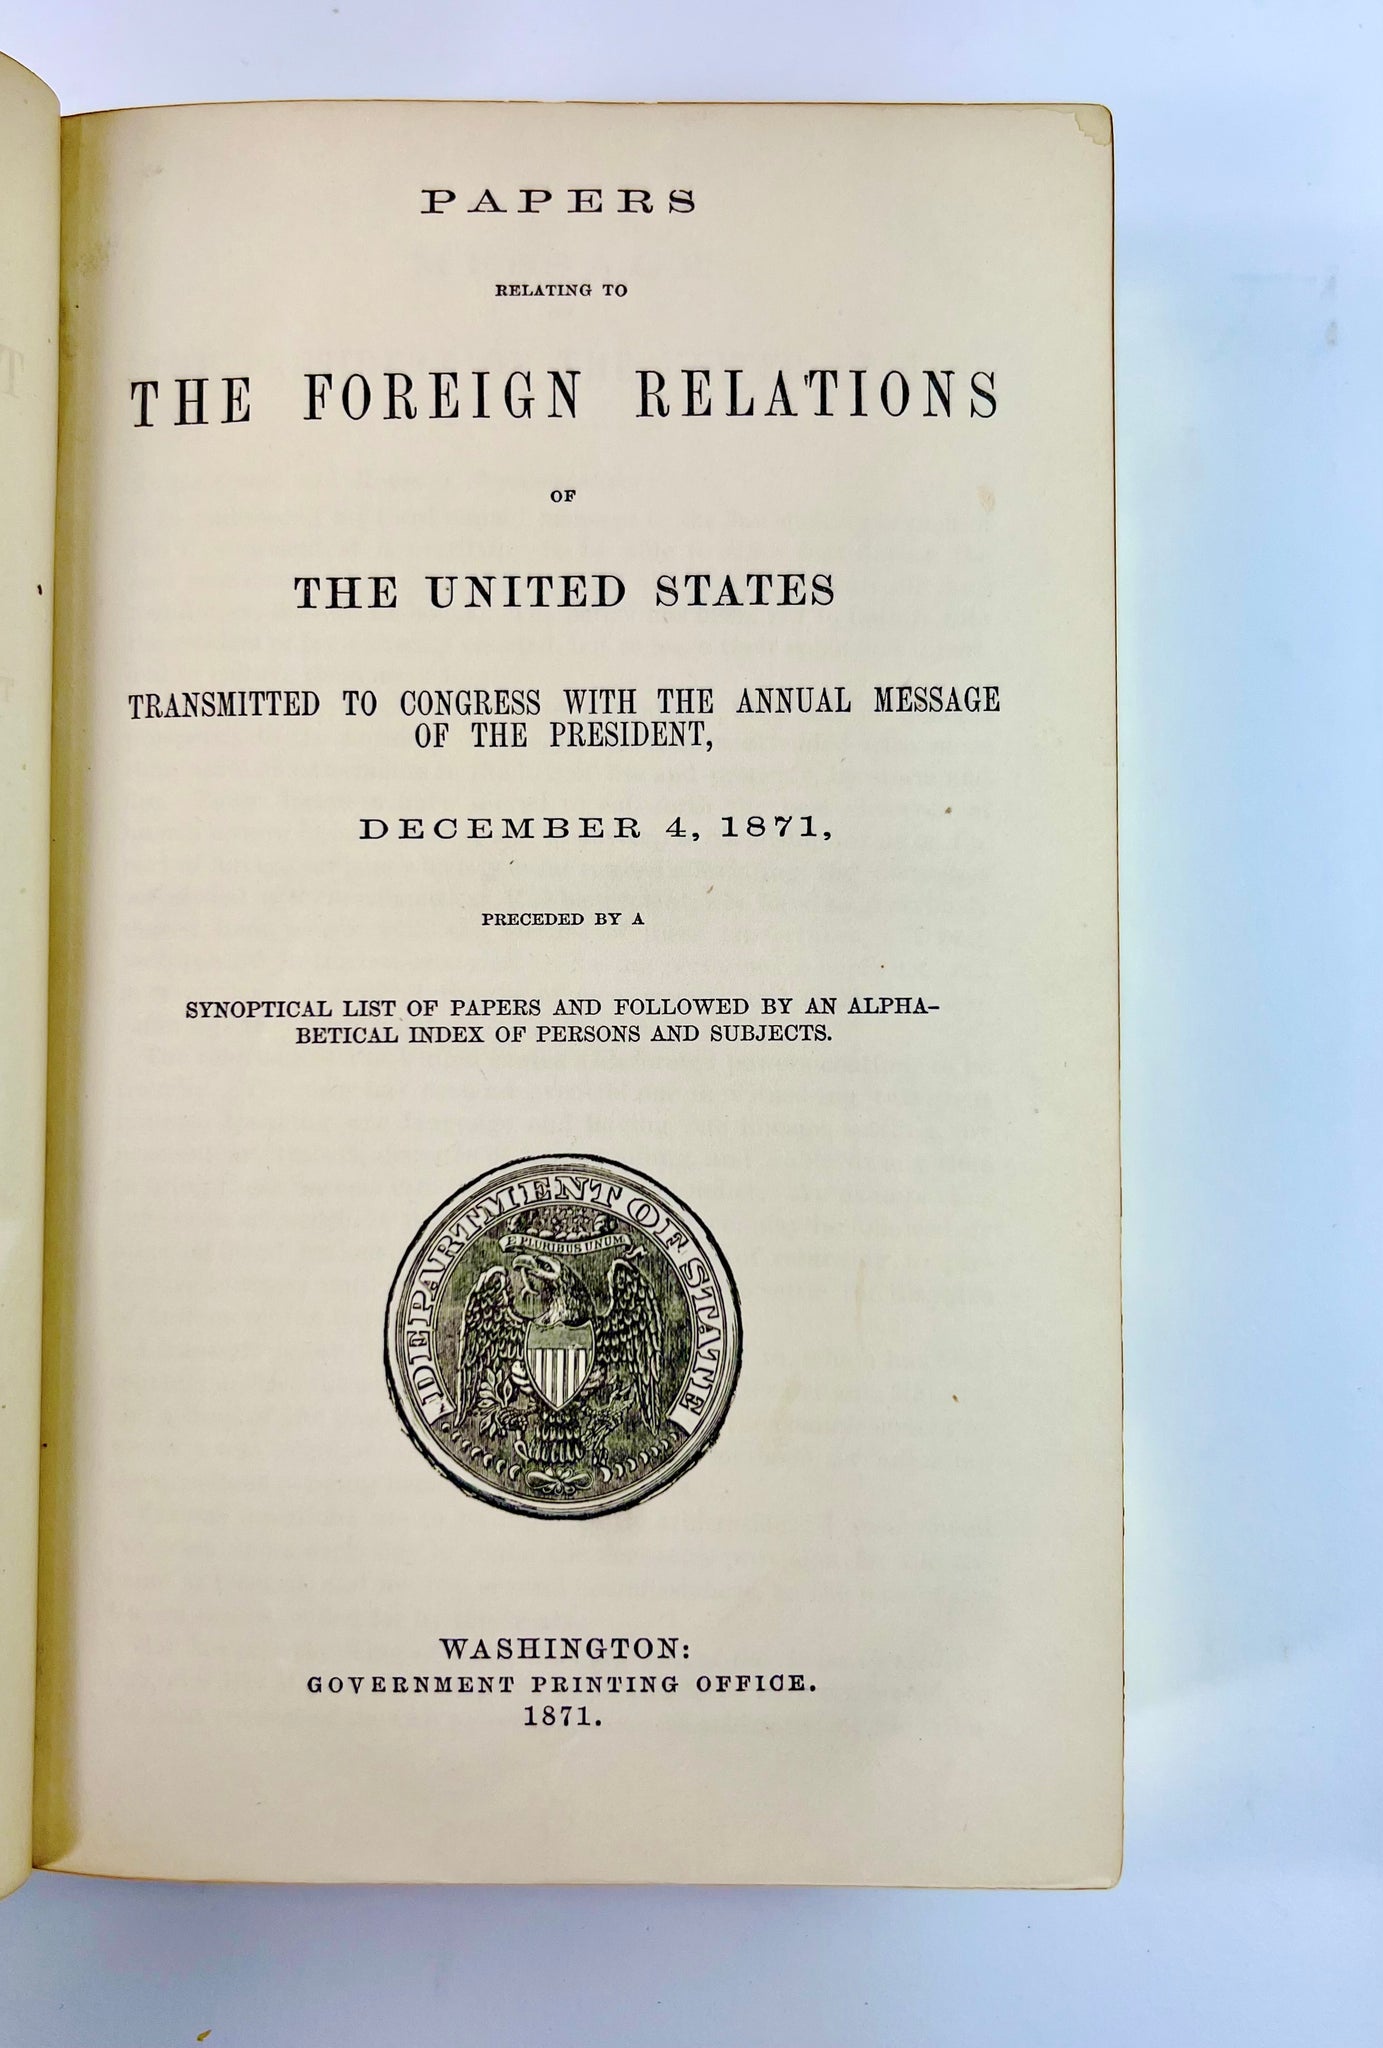 FISH, Hamilton. Papers Relating to the Foreign Relations of the United States.